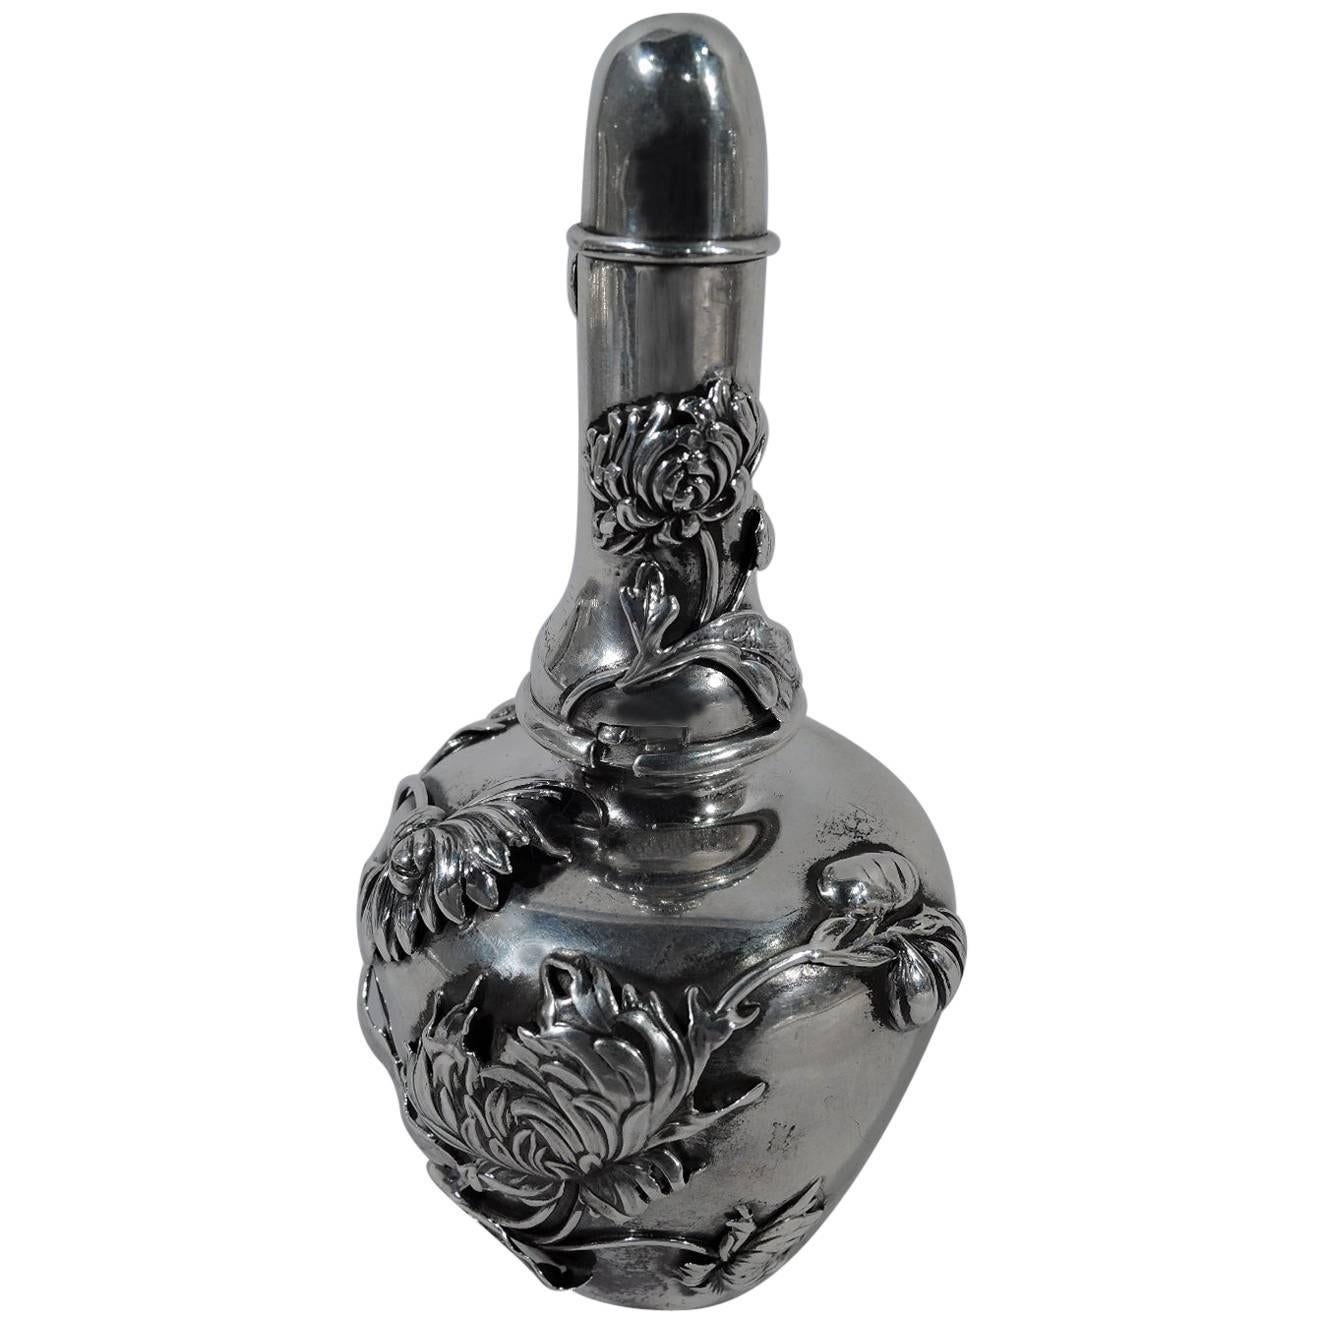 Shiebler Aesthetic Sterling Silver Scent Bottle with Chrysanthemums